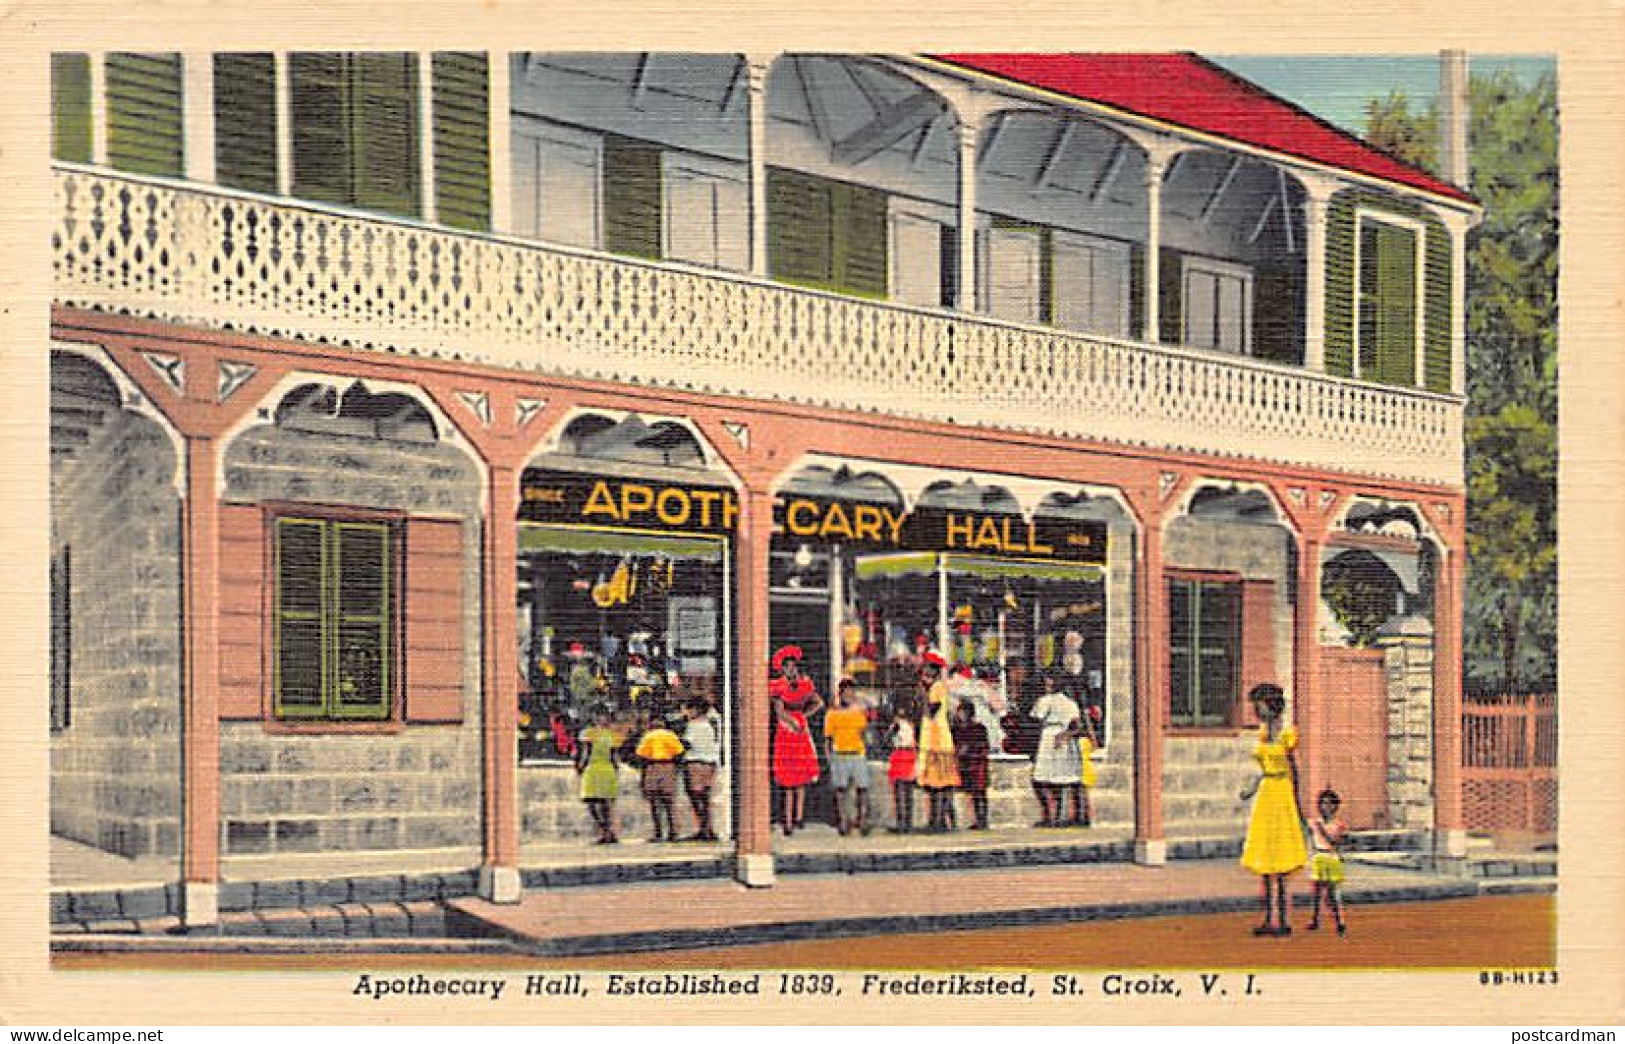 U.S. Virgin Islands - ST. CROIX - Frederiksted - Apothecary Hall - Publ. Schade's Series  - Vierges (Iles), Amér.